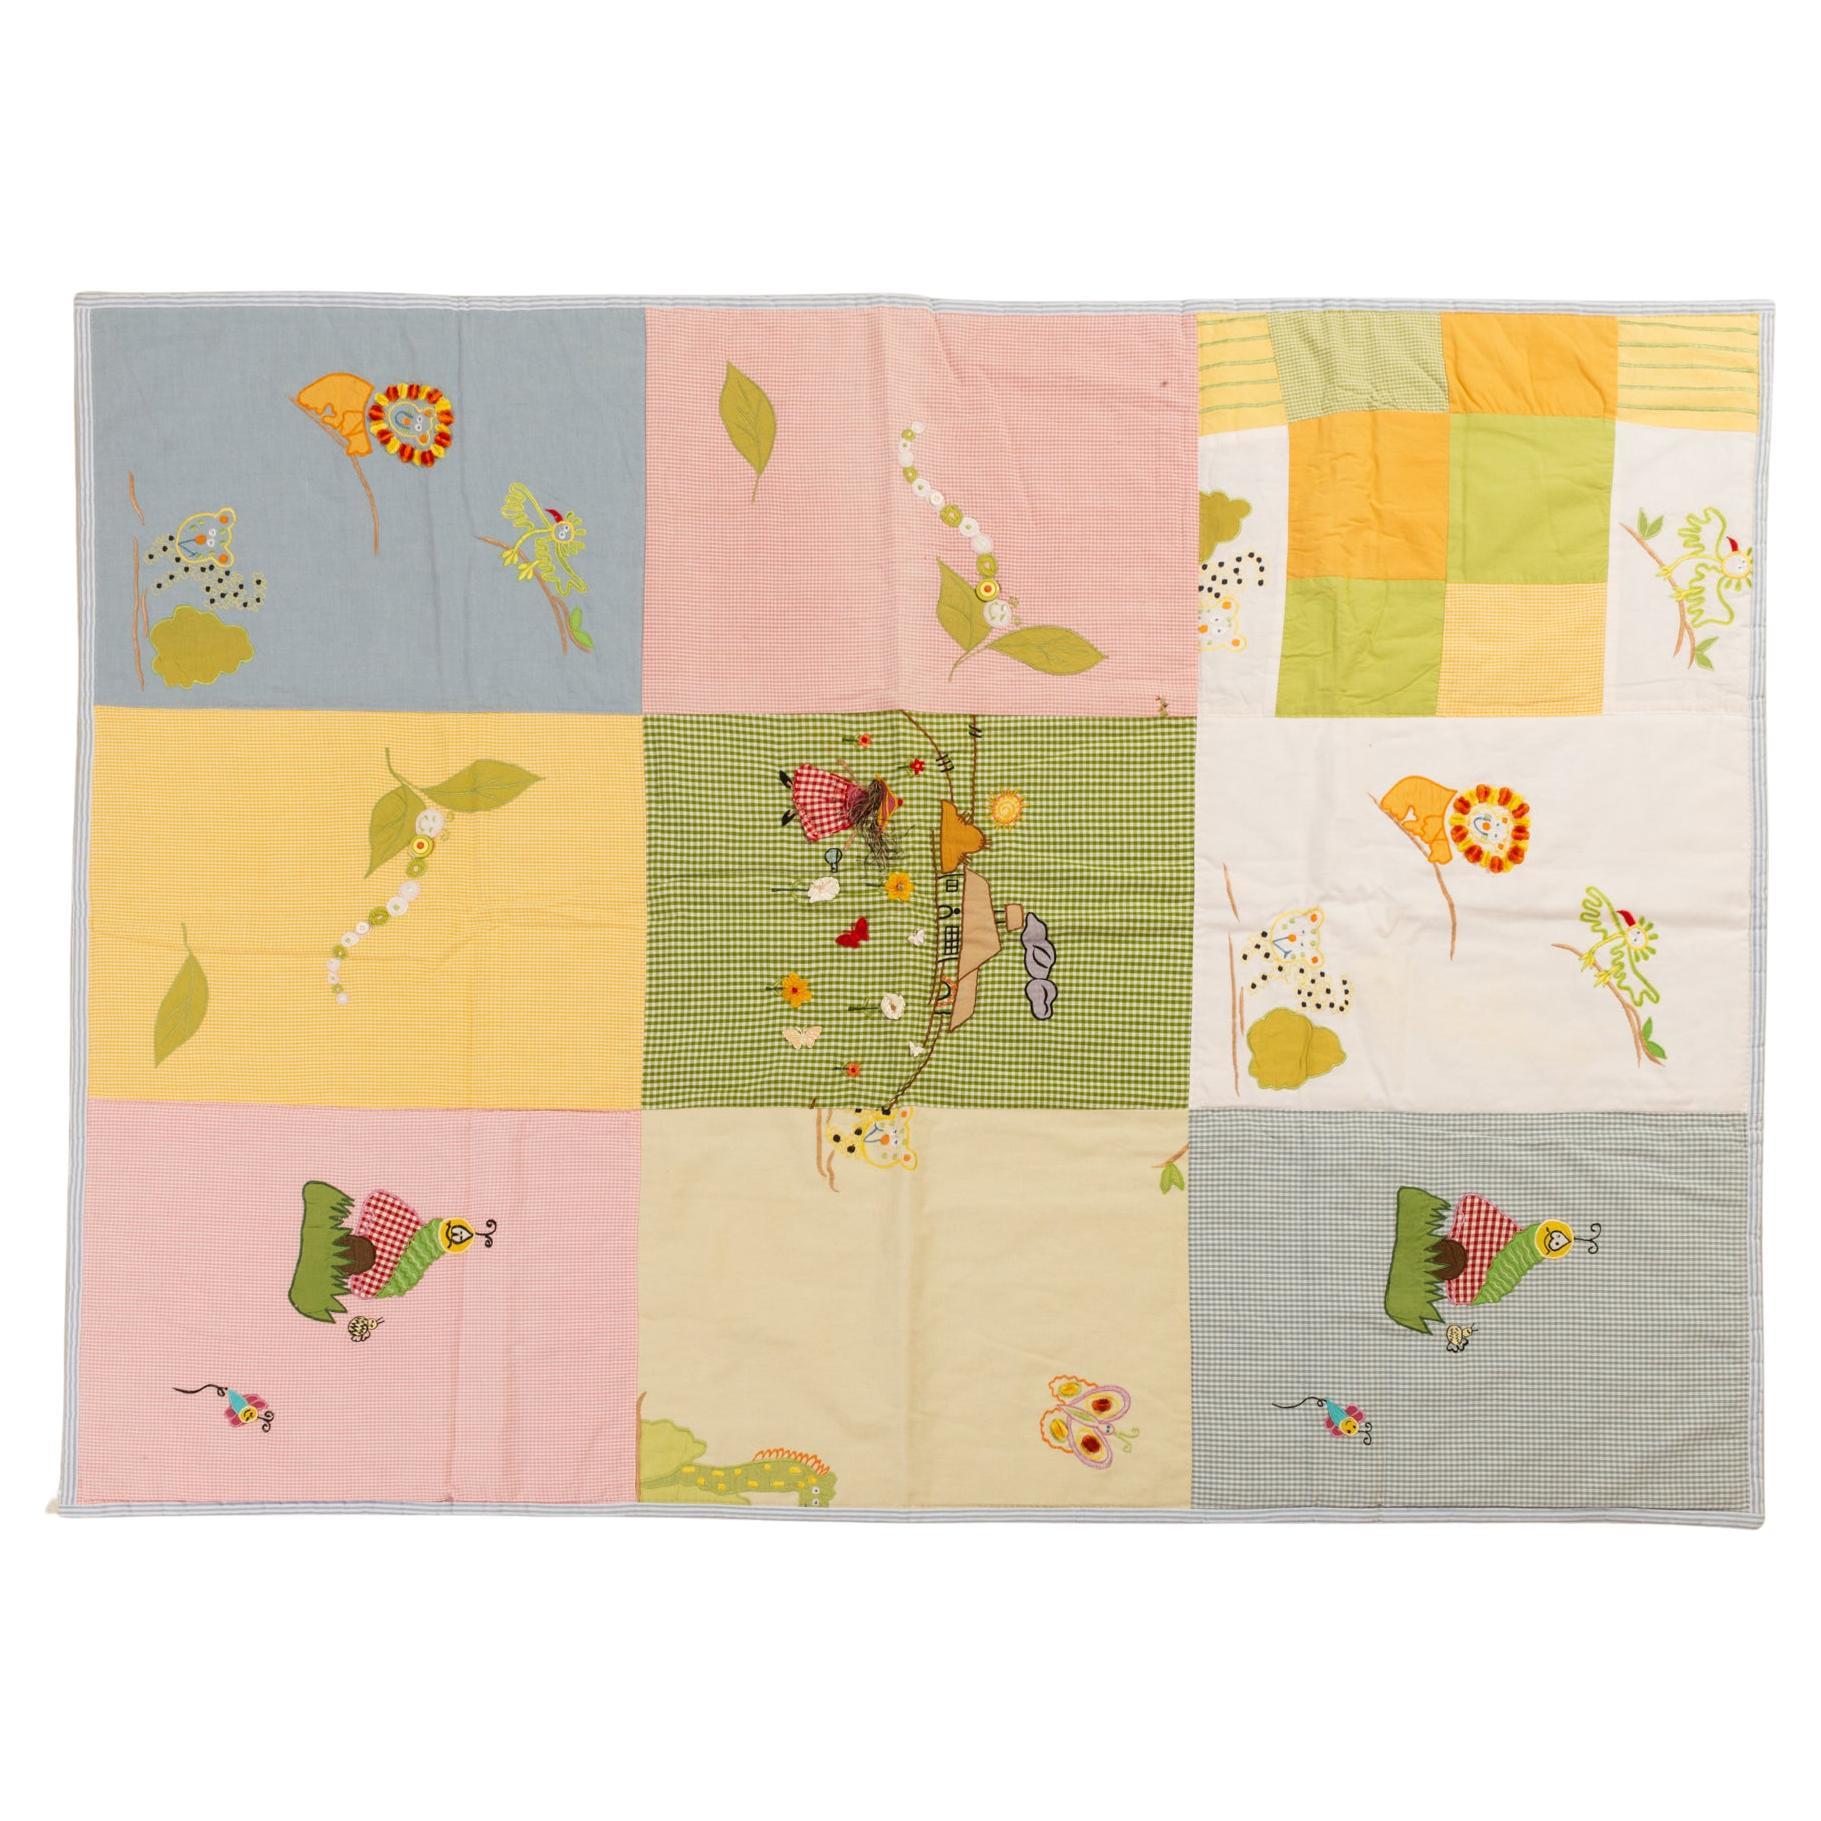 Patchwork Handmade Quilt For Sale